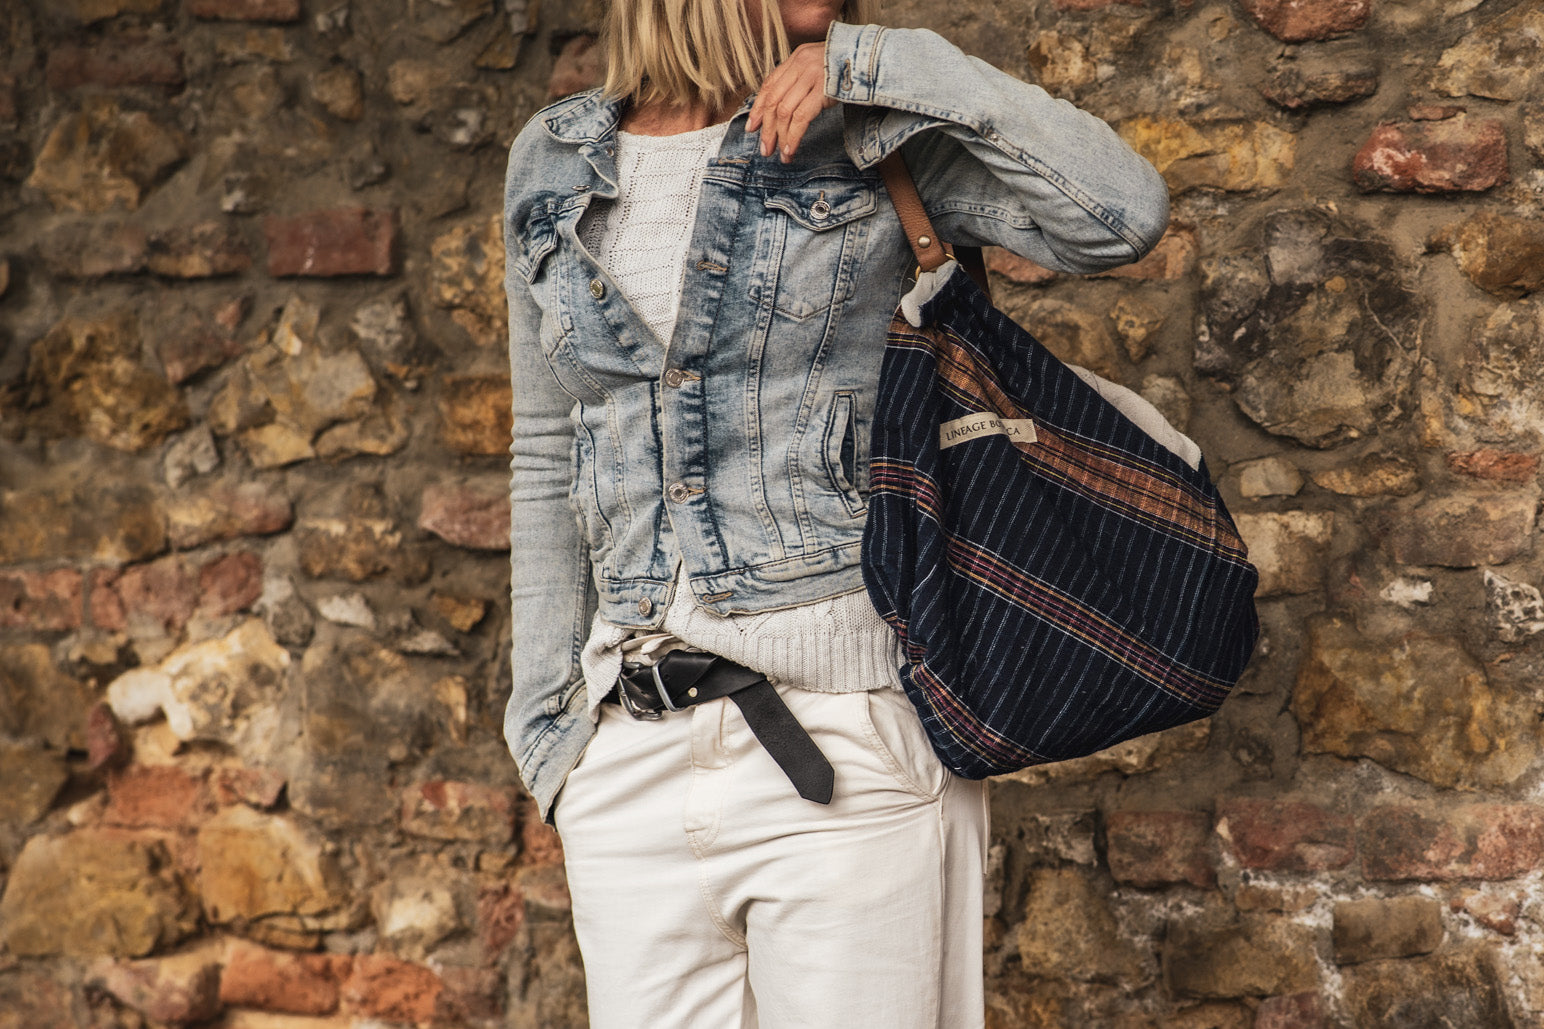 Bag: Handwoven antique cotton from Bulgaria, recycled leather belt - BG145